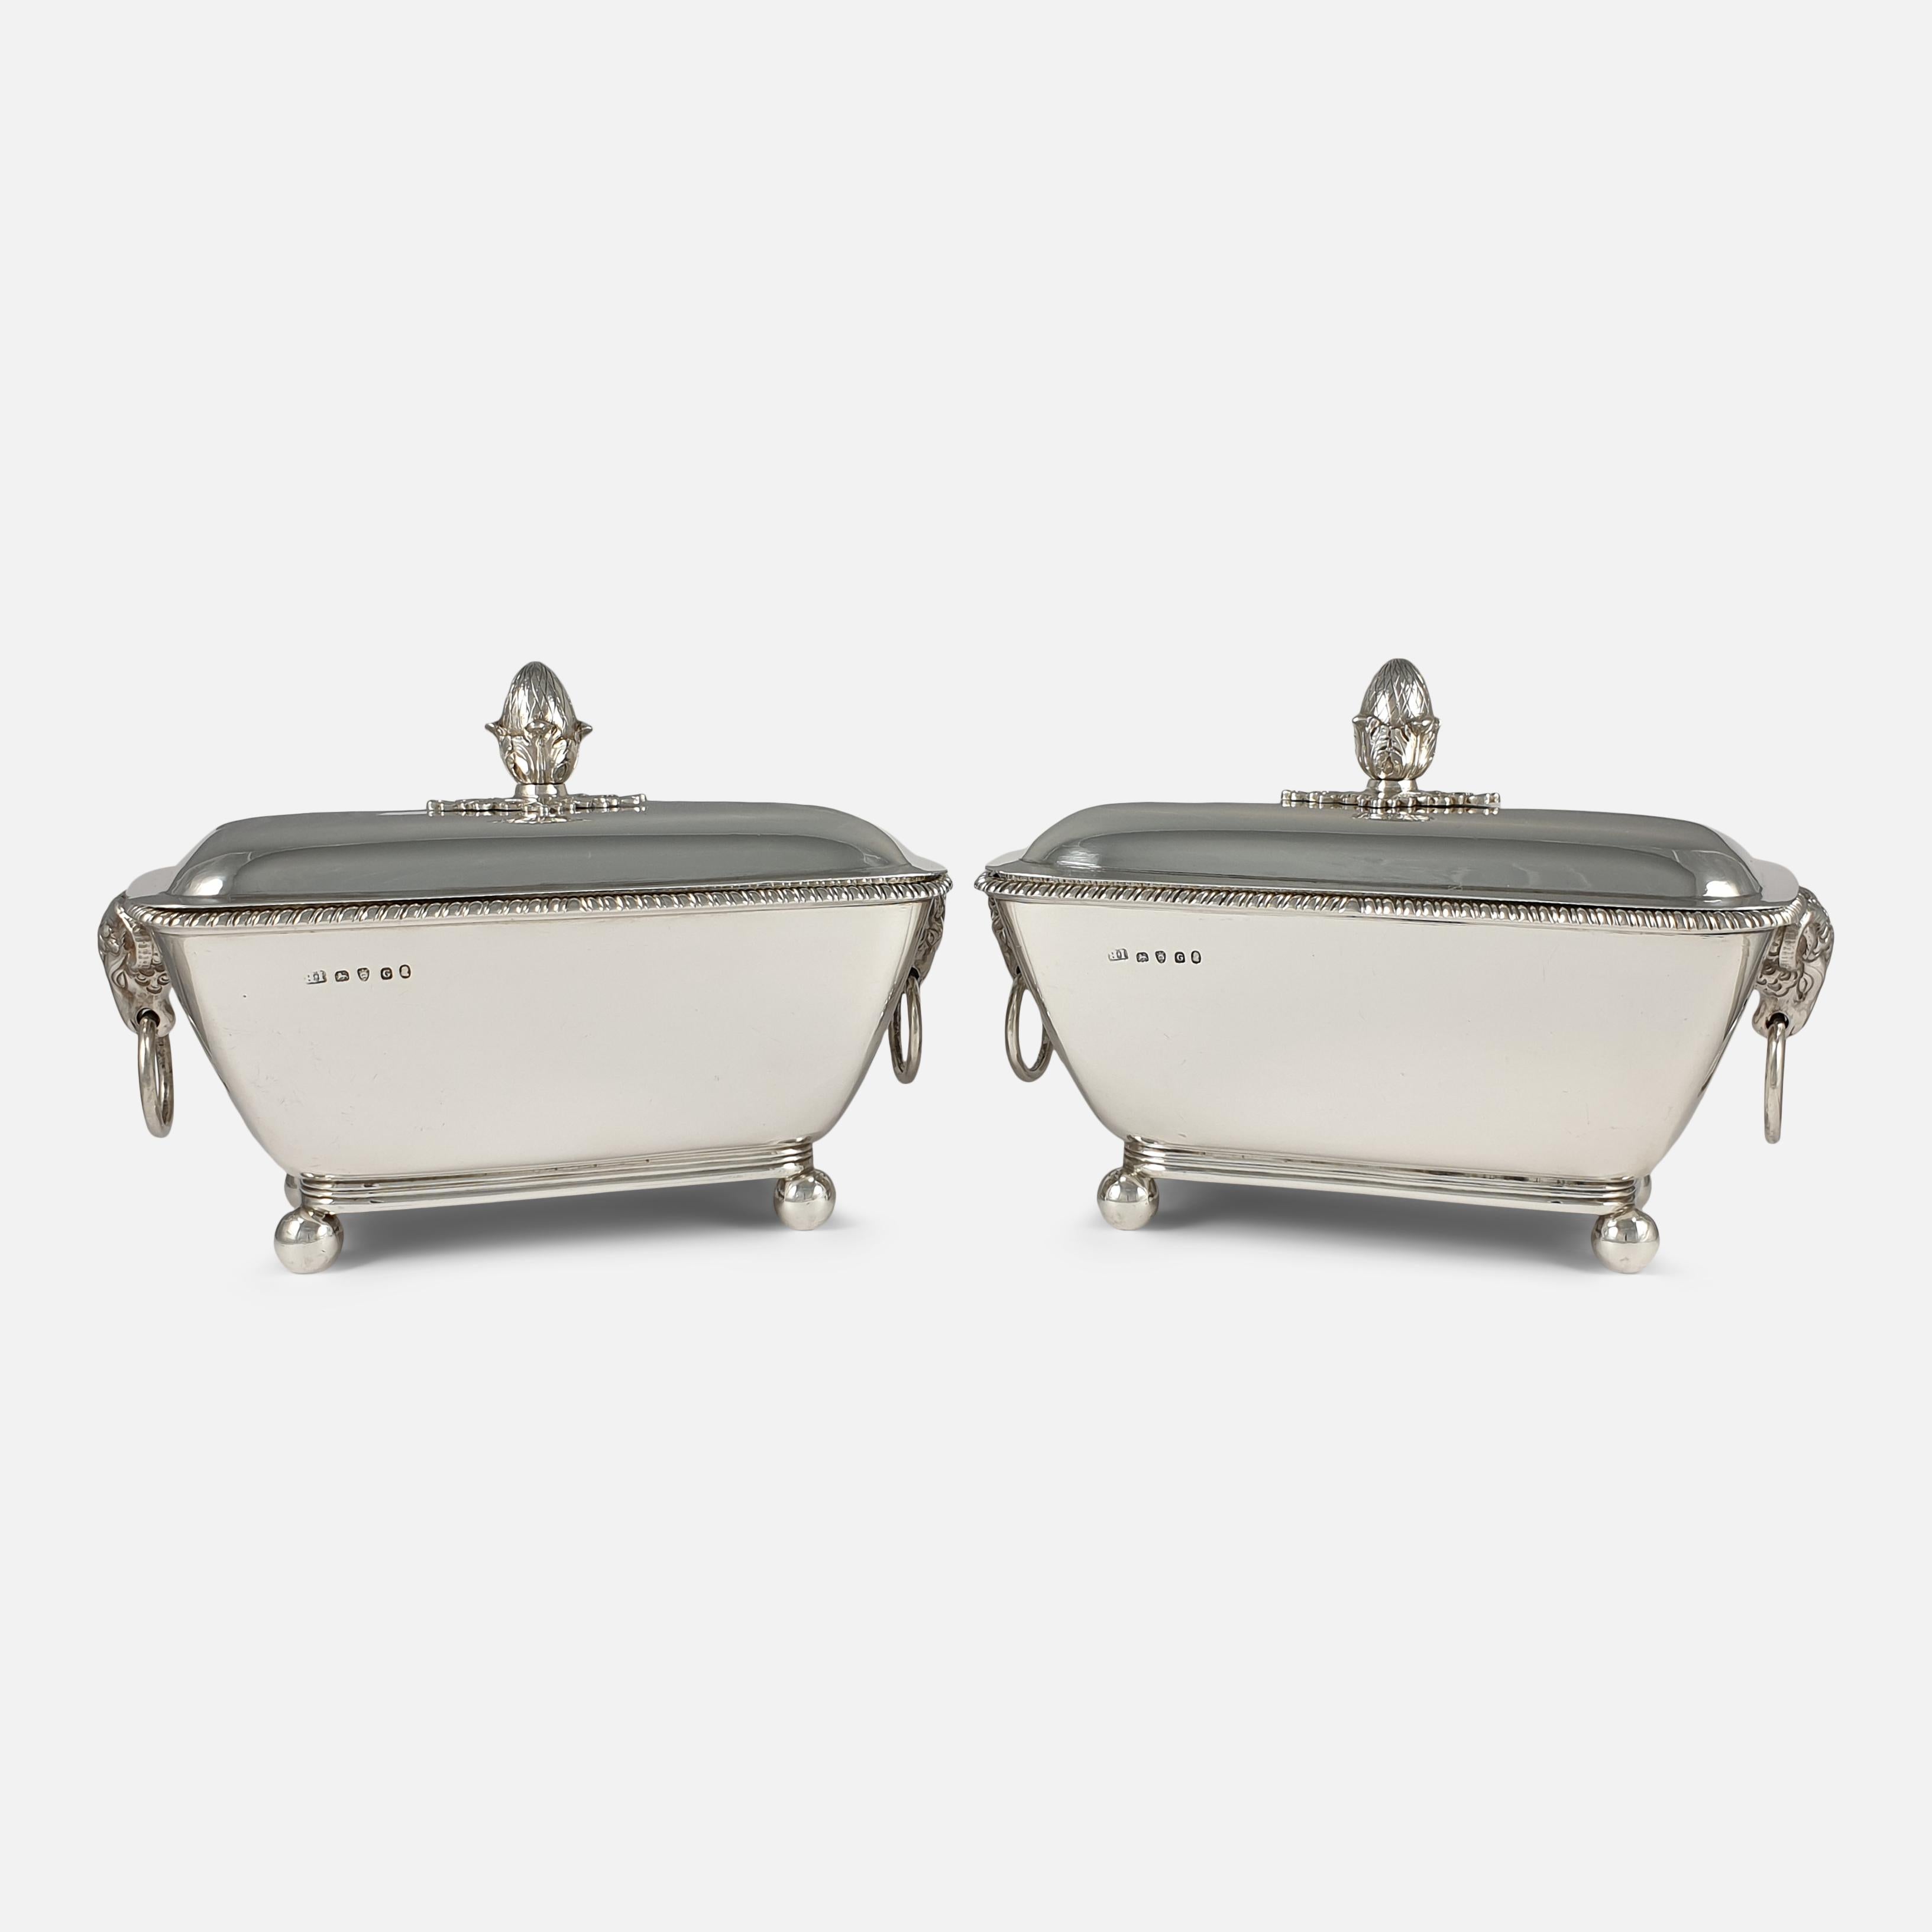 Pair of George III Silver Sauce Tureens and Covers, John Robins, London, 1802 For Sale 12